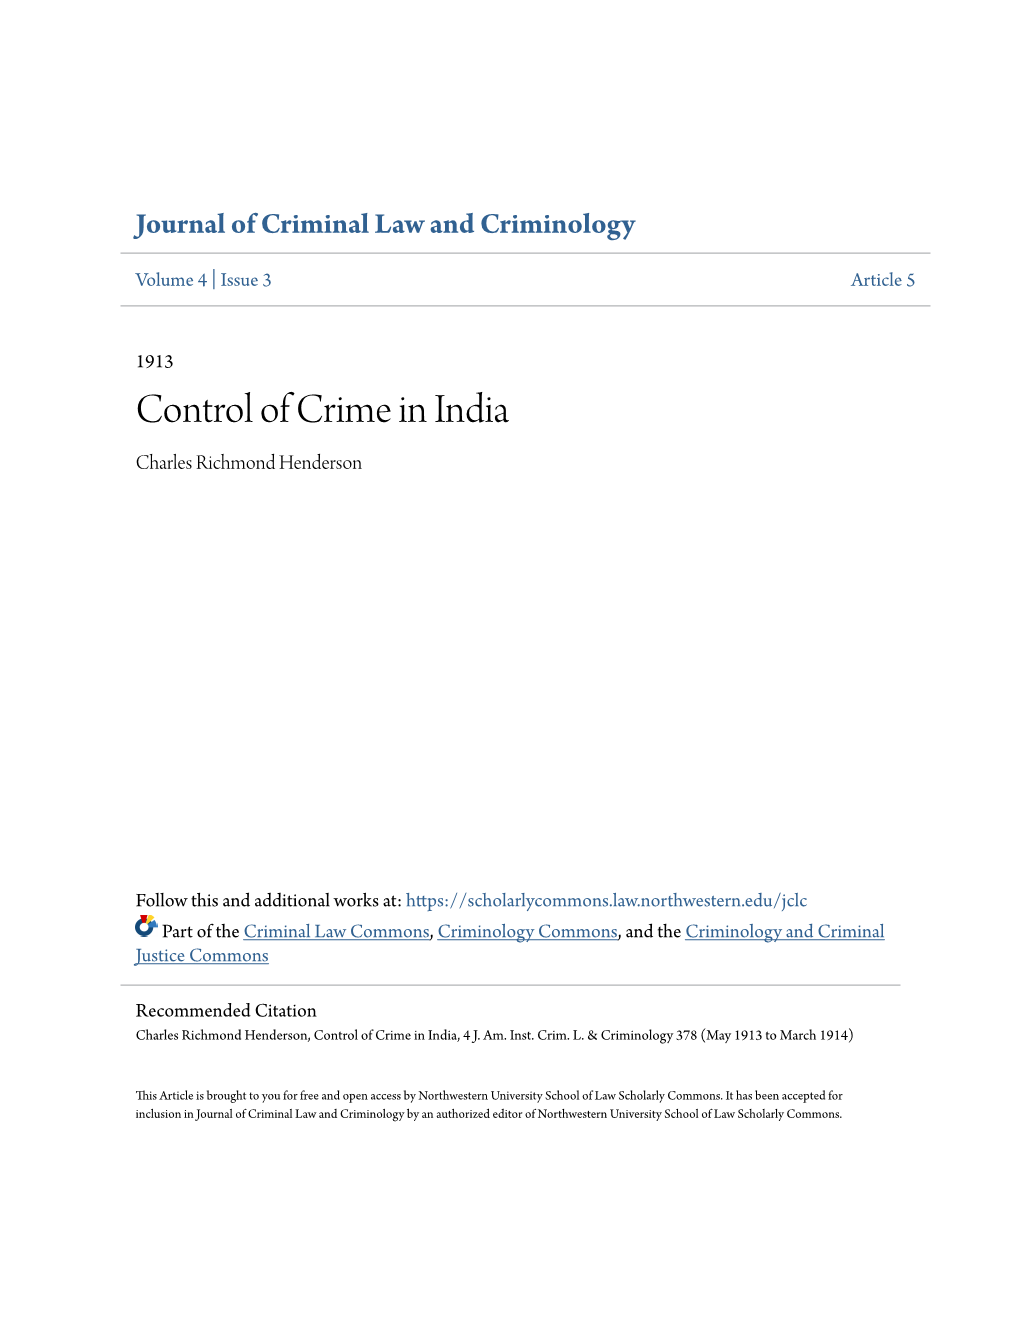 Control of Crime in India Charles Richmond Henderson